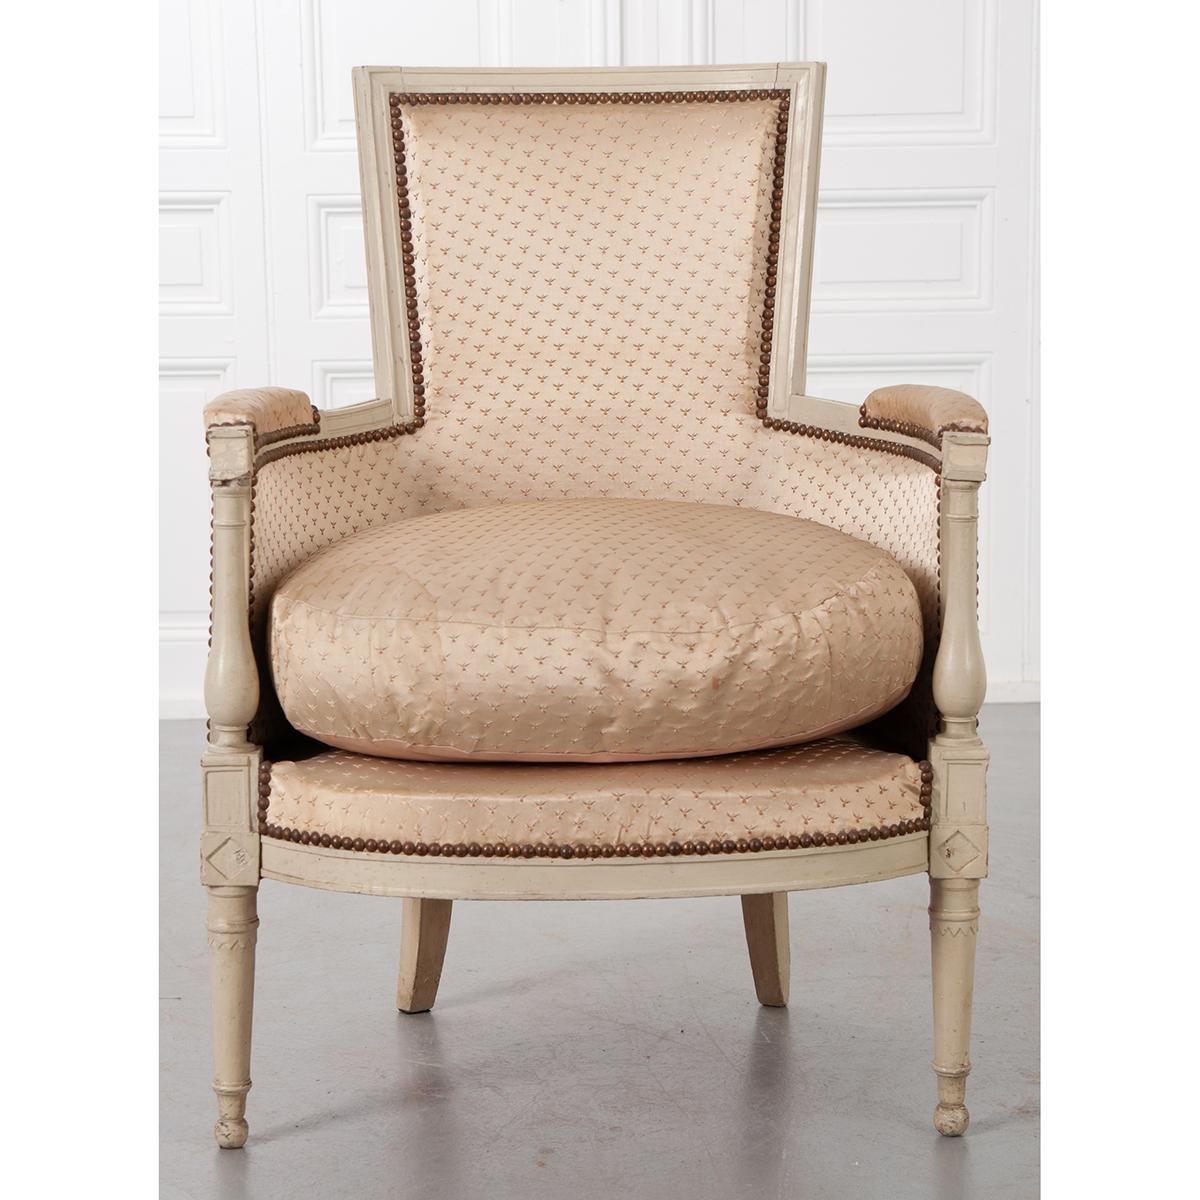 A fabulous early 20th century bergère, with taupe painted frame, made in the Directoire style in France, circa 1900. This beautiful, large chair has a linear back that is juxtaposed to its round seat. The chair is upholstered in a vintage silk